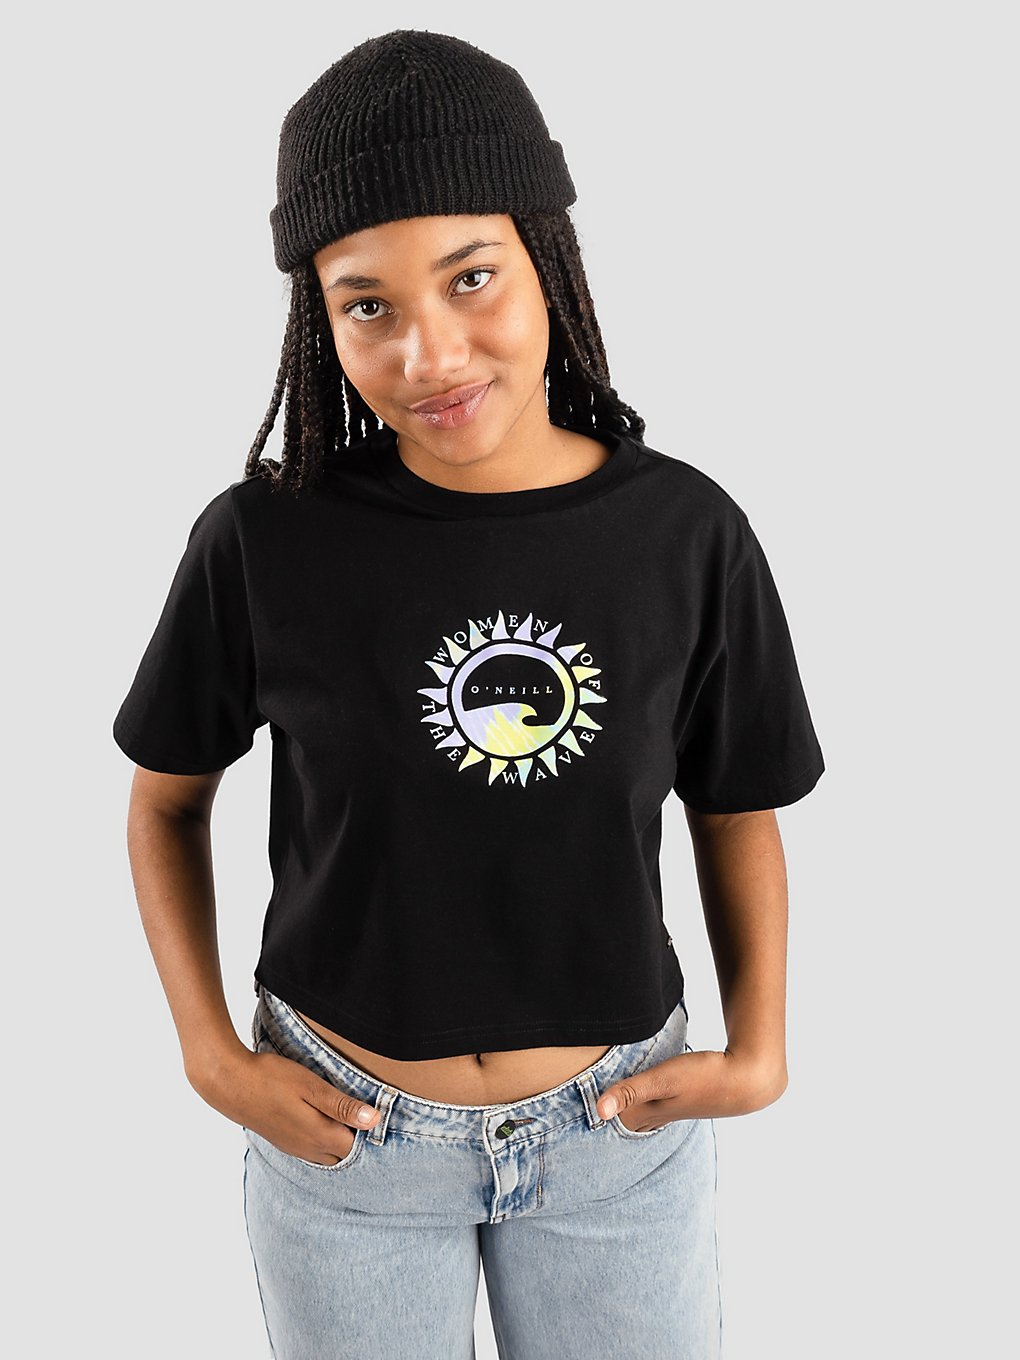 O'Neill Wow Cropped T-Shirt black out kaufen